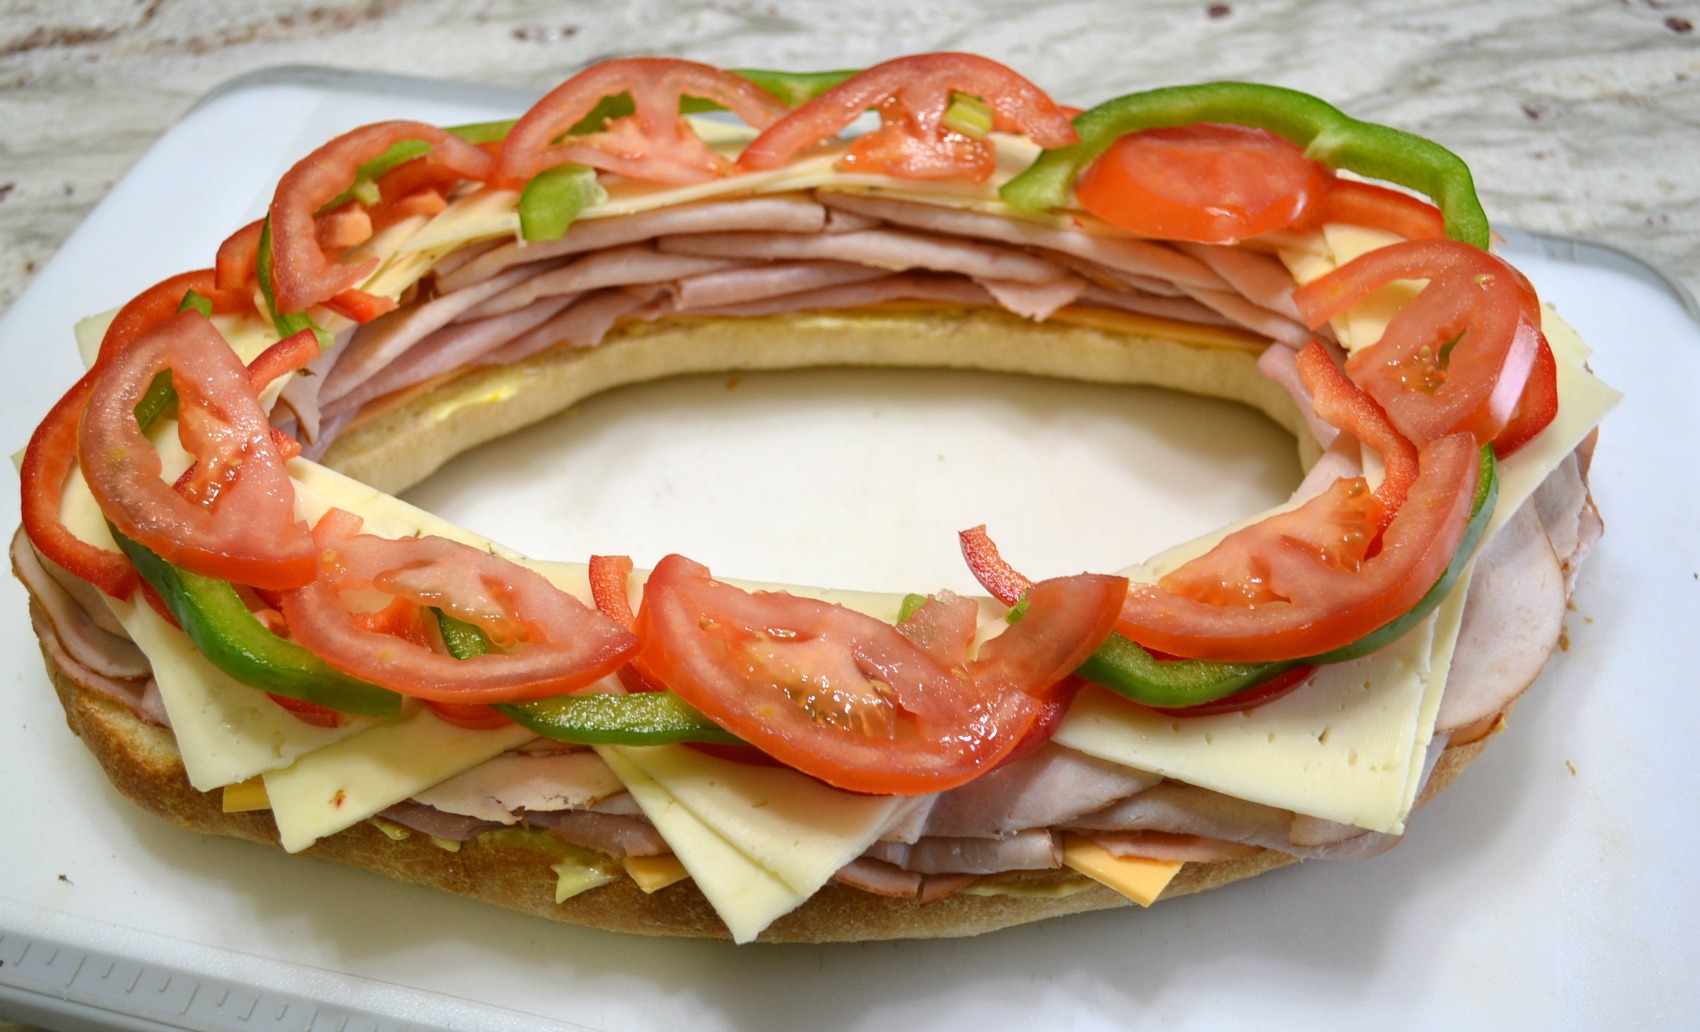 This Sensational Stadium Sandwich is packed with meat, cheese, and veggies. Perfect to serve at any tailgate party